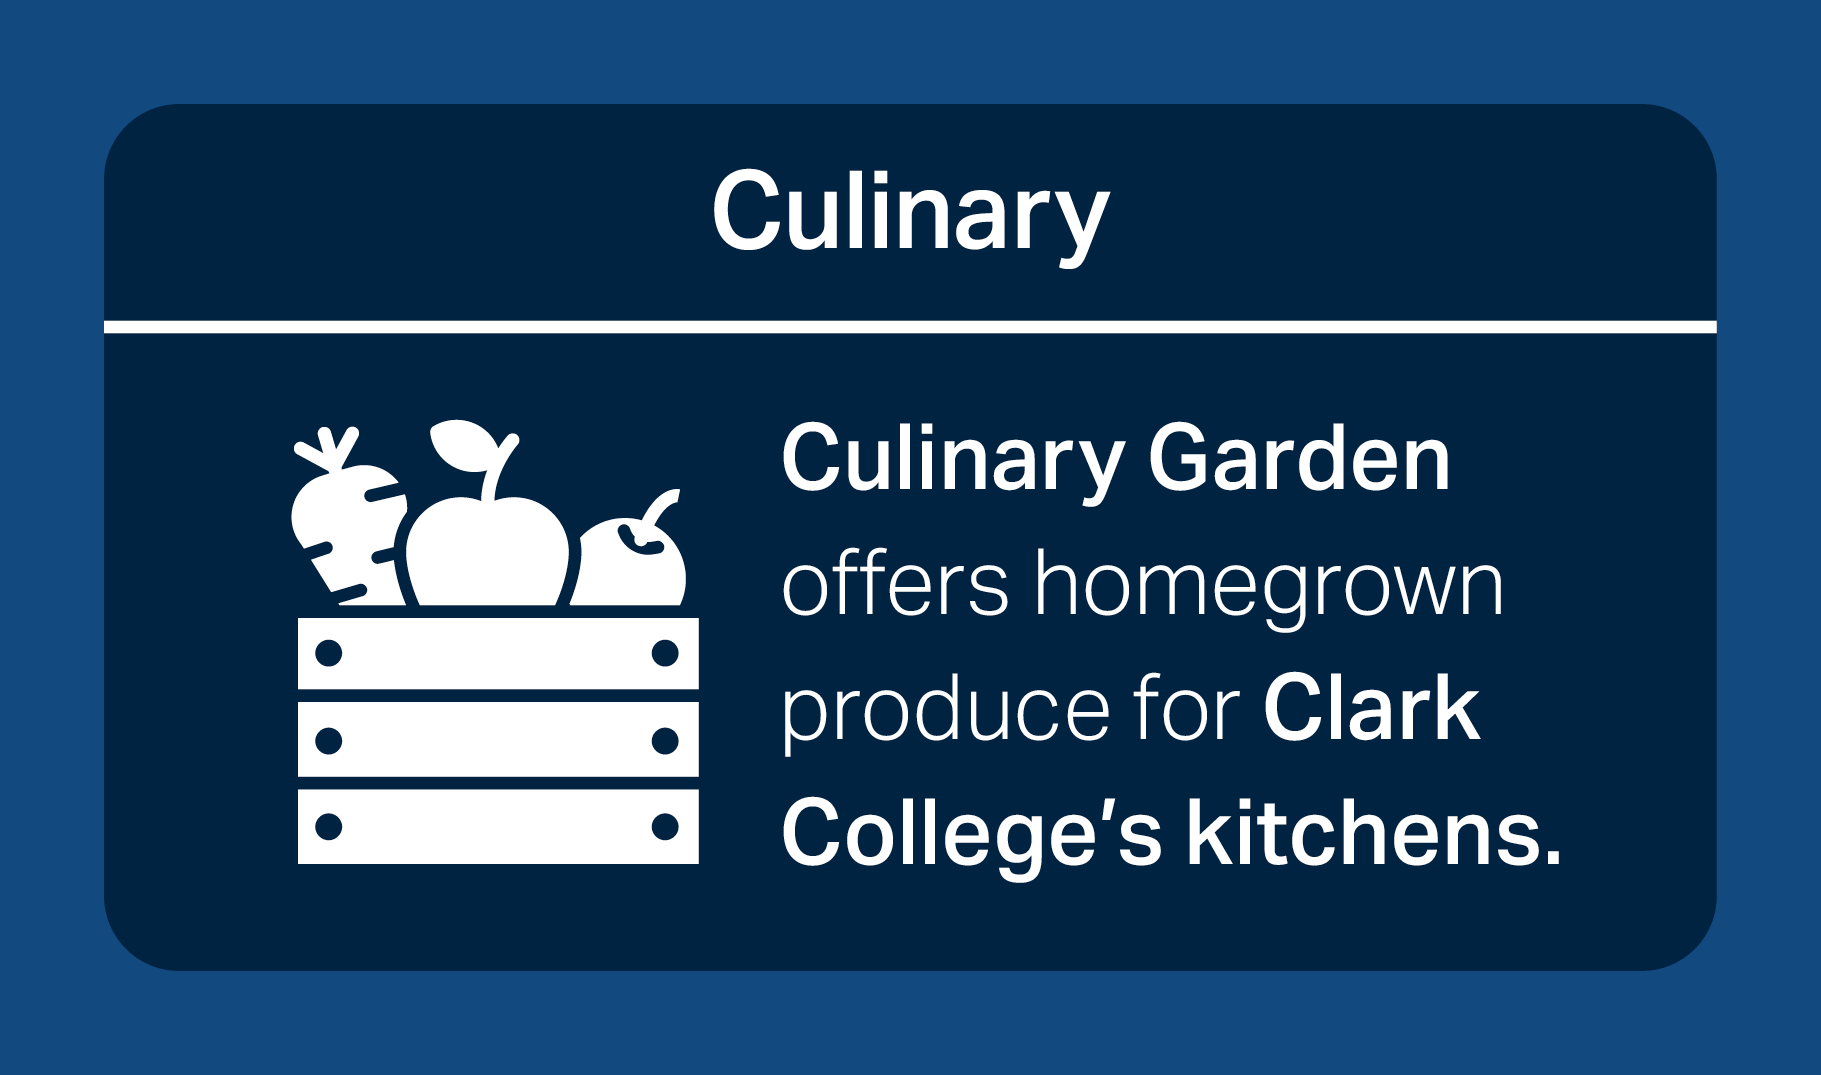 Culinary garden offers home grown produce for Clark colleges kitchens